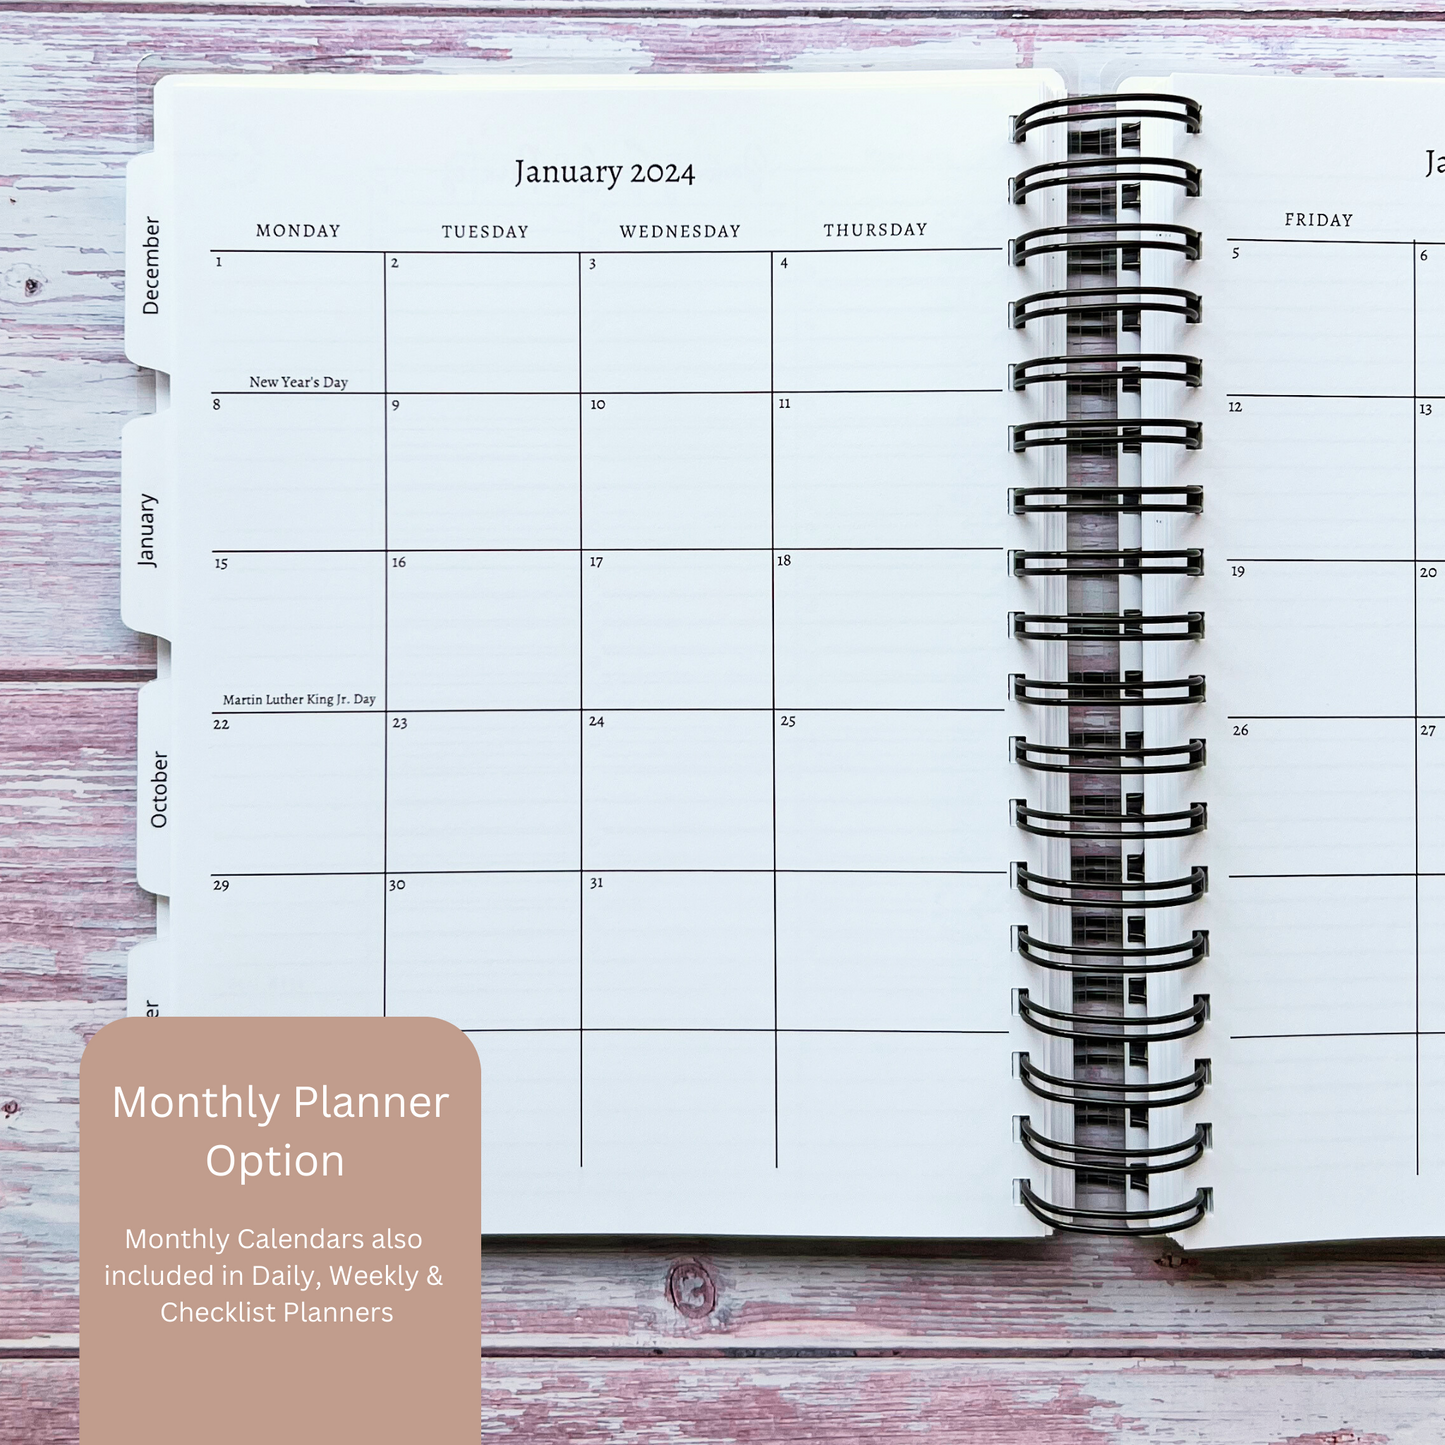 Personalized Monthly Planner - Wild & Free